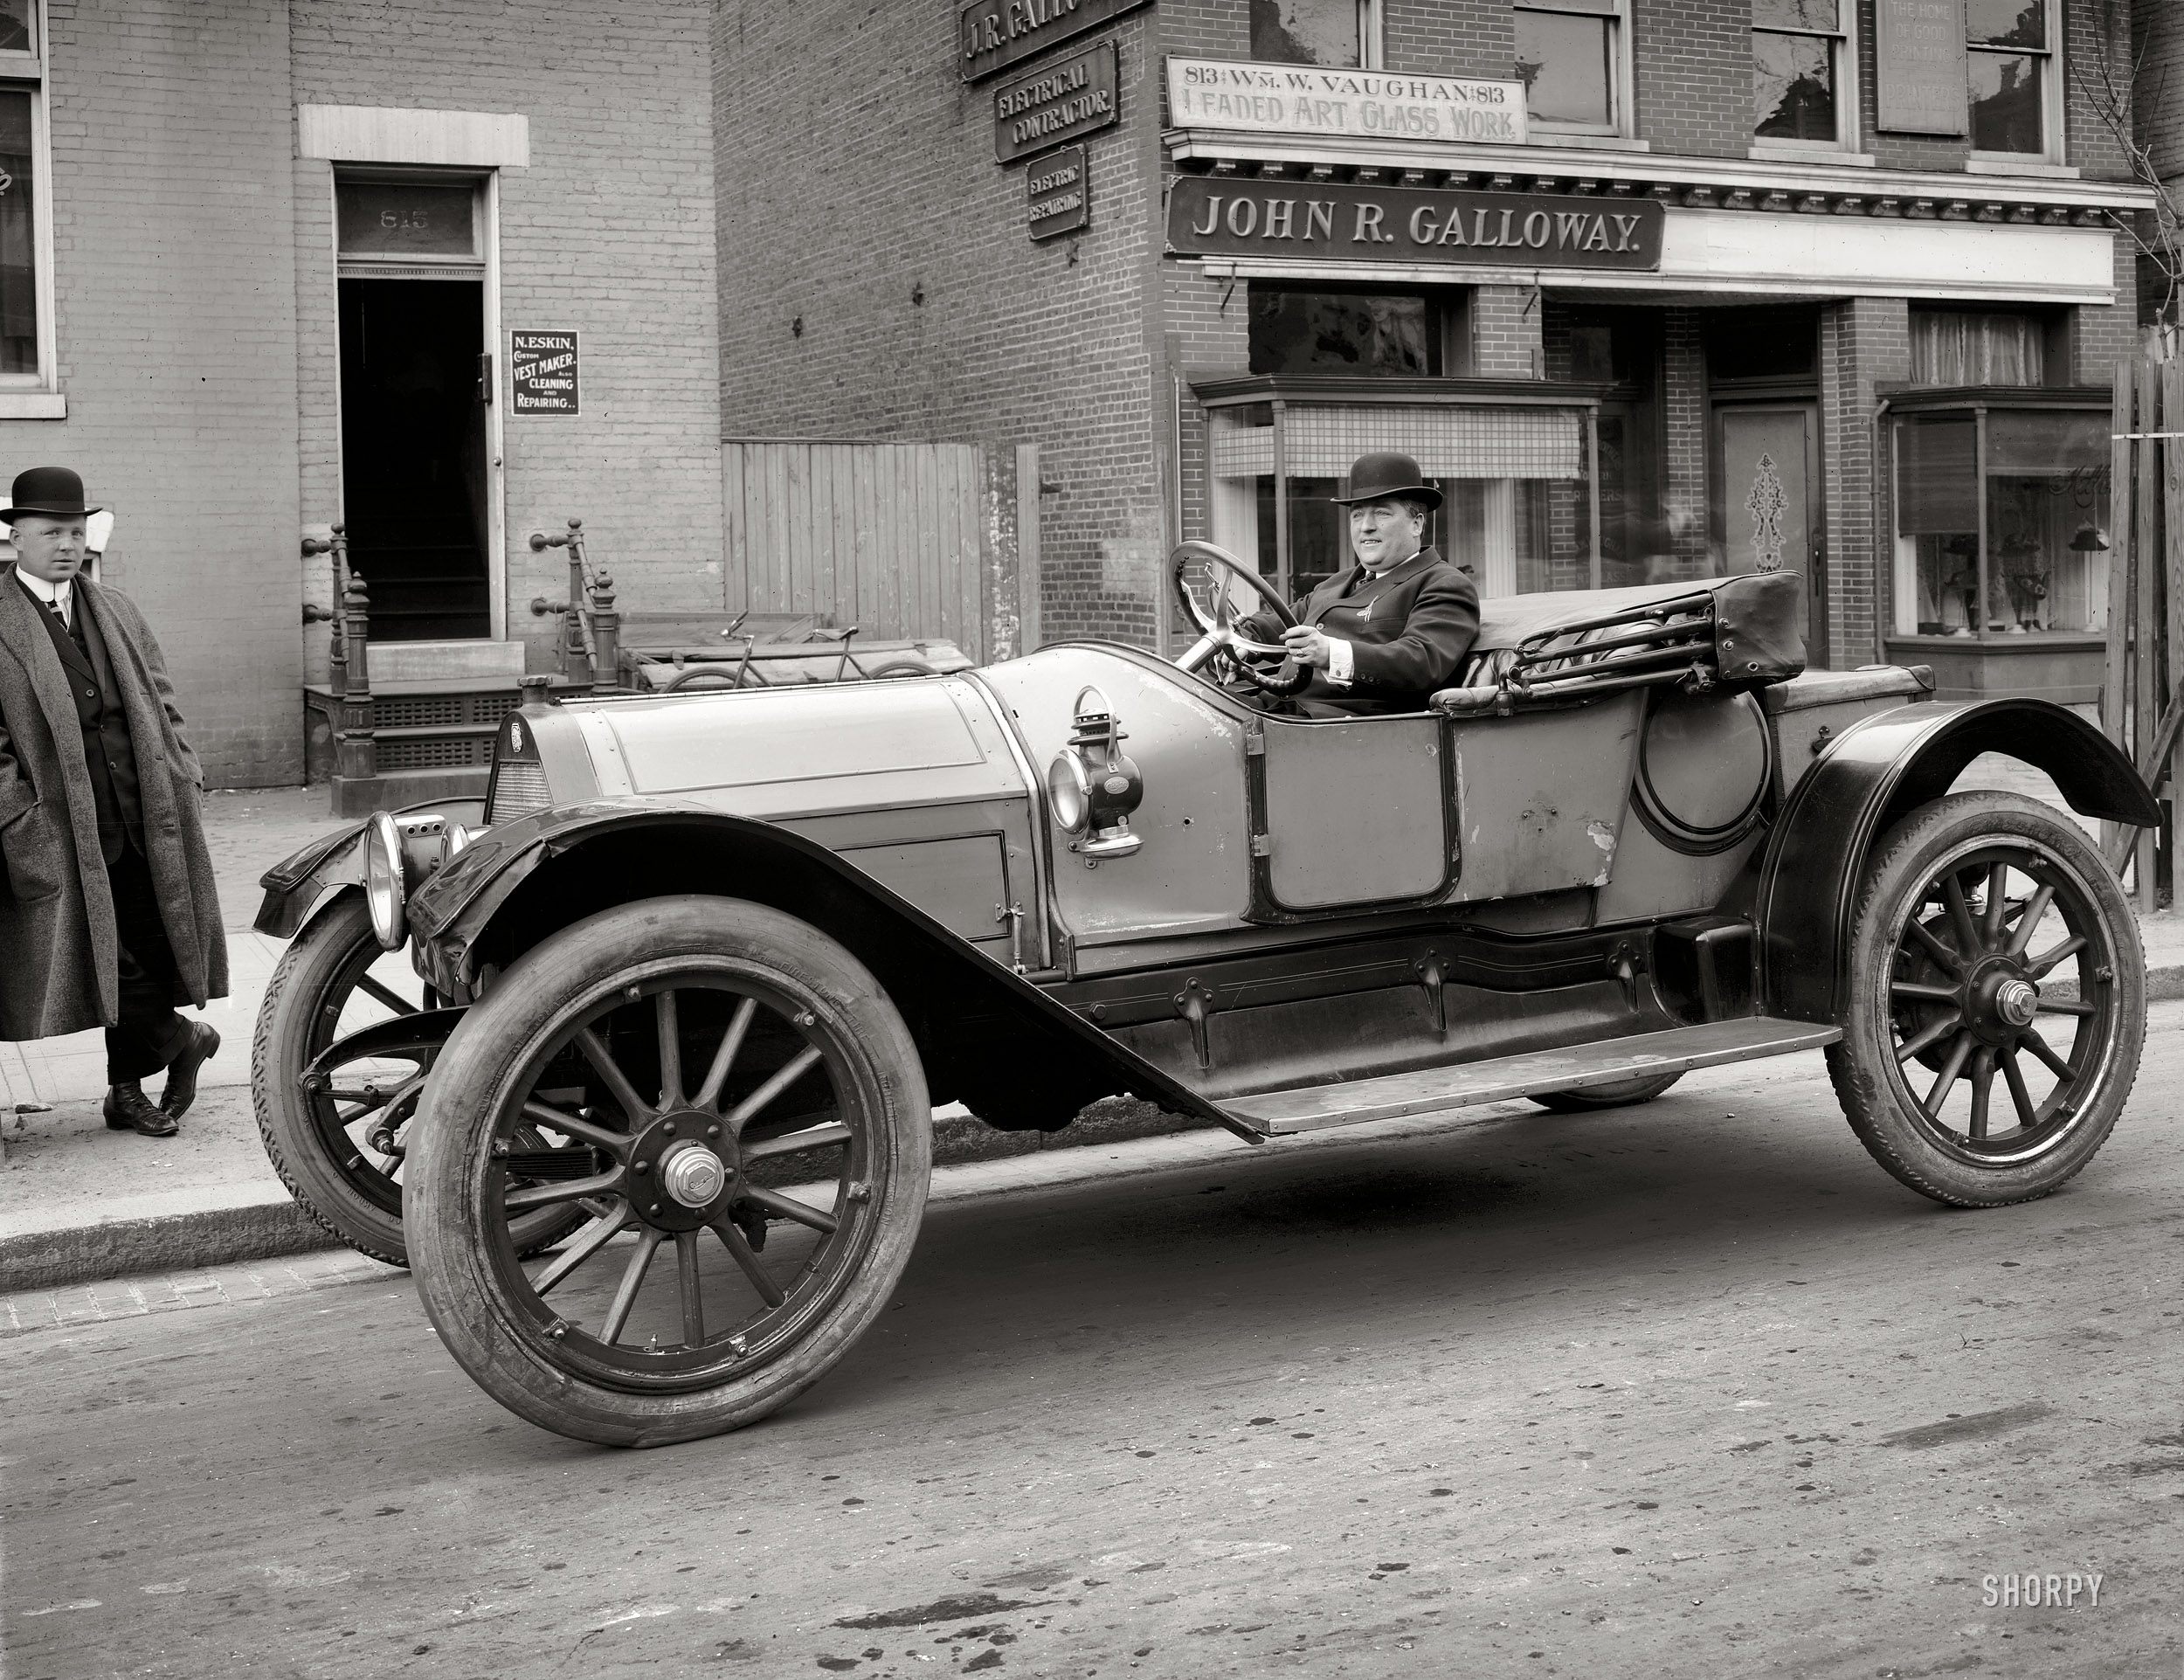 "James Kelly." In a circa 1911 Cole Model 30 somewhere in Washington, D.C. National Photo Company Collection glass negative. View full size.